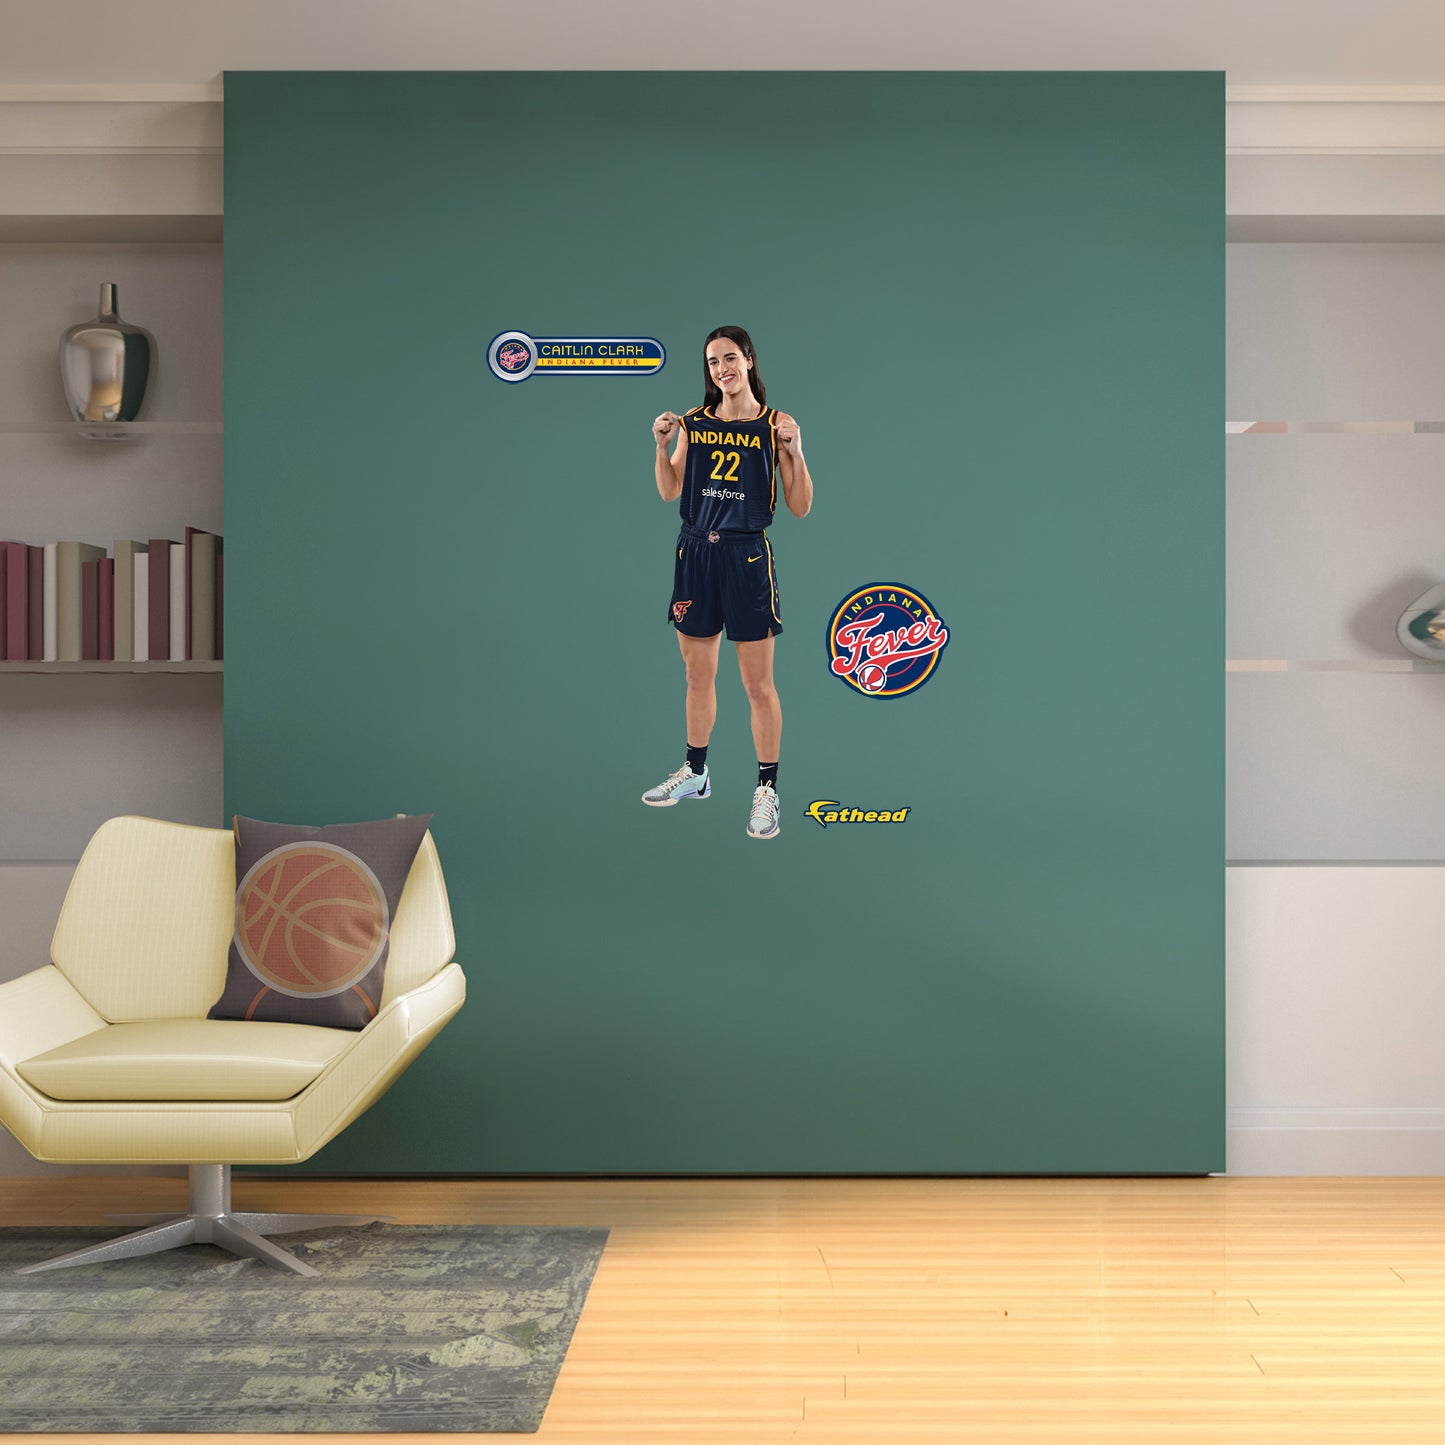 Indiana Fever: Caitlin Clark The Future        - Officially Licensed WNBA Removable     Adhesive Decal